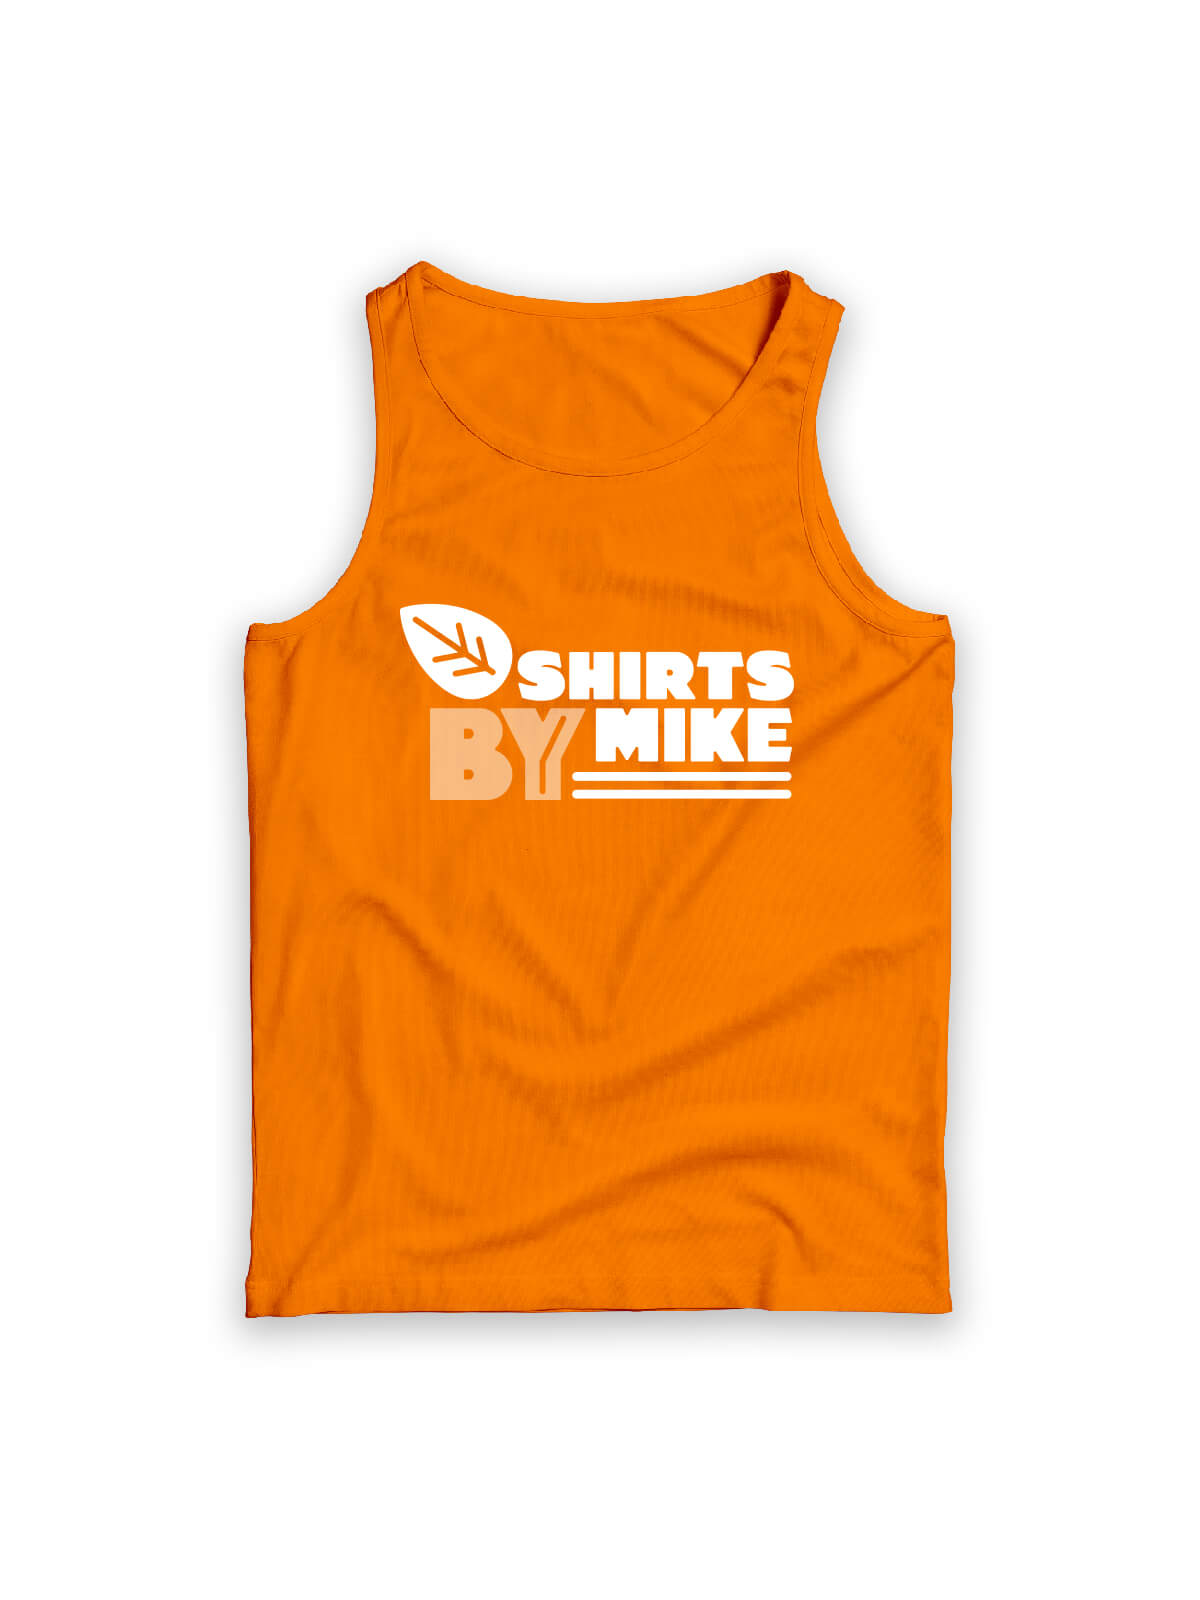 orange tank top with Shirts By Mike logo